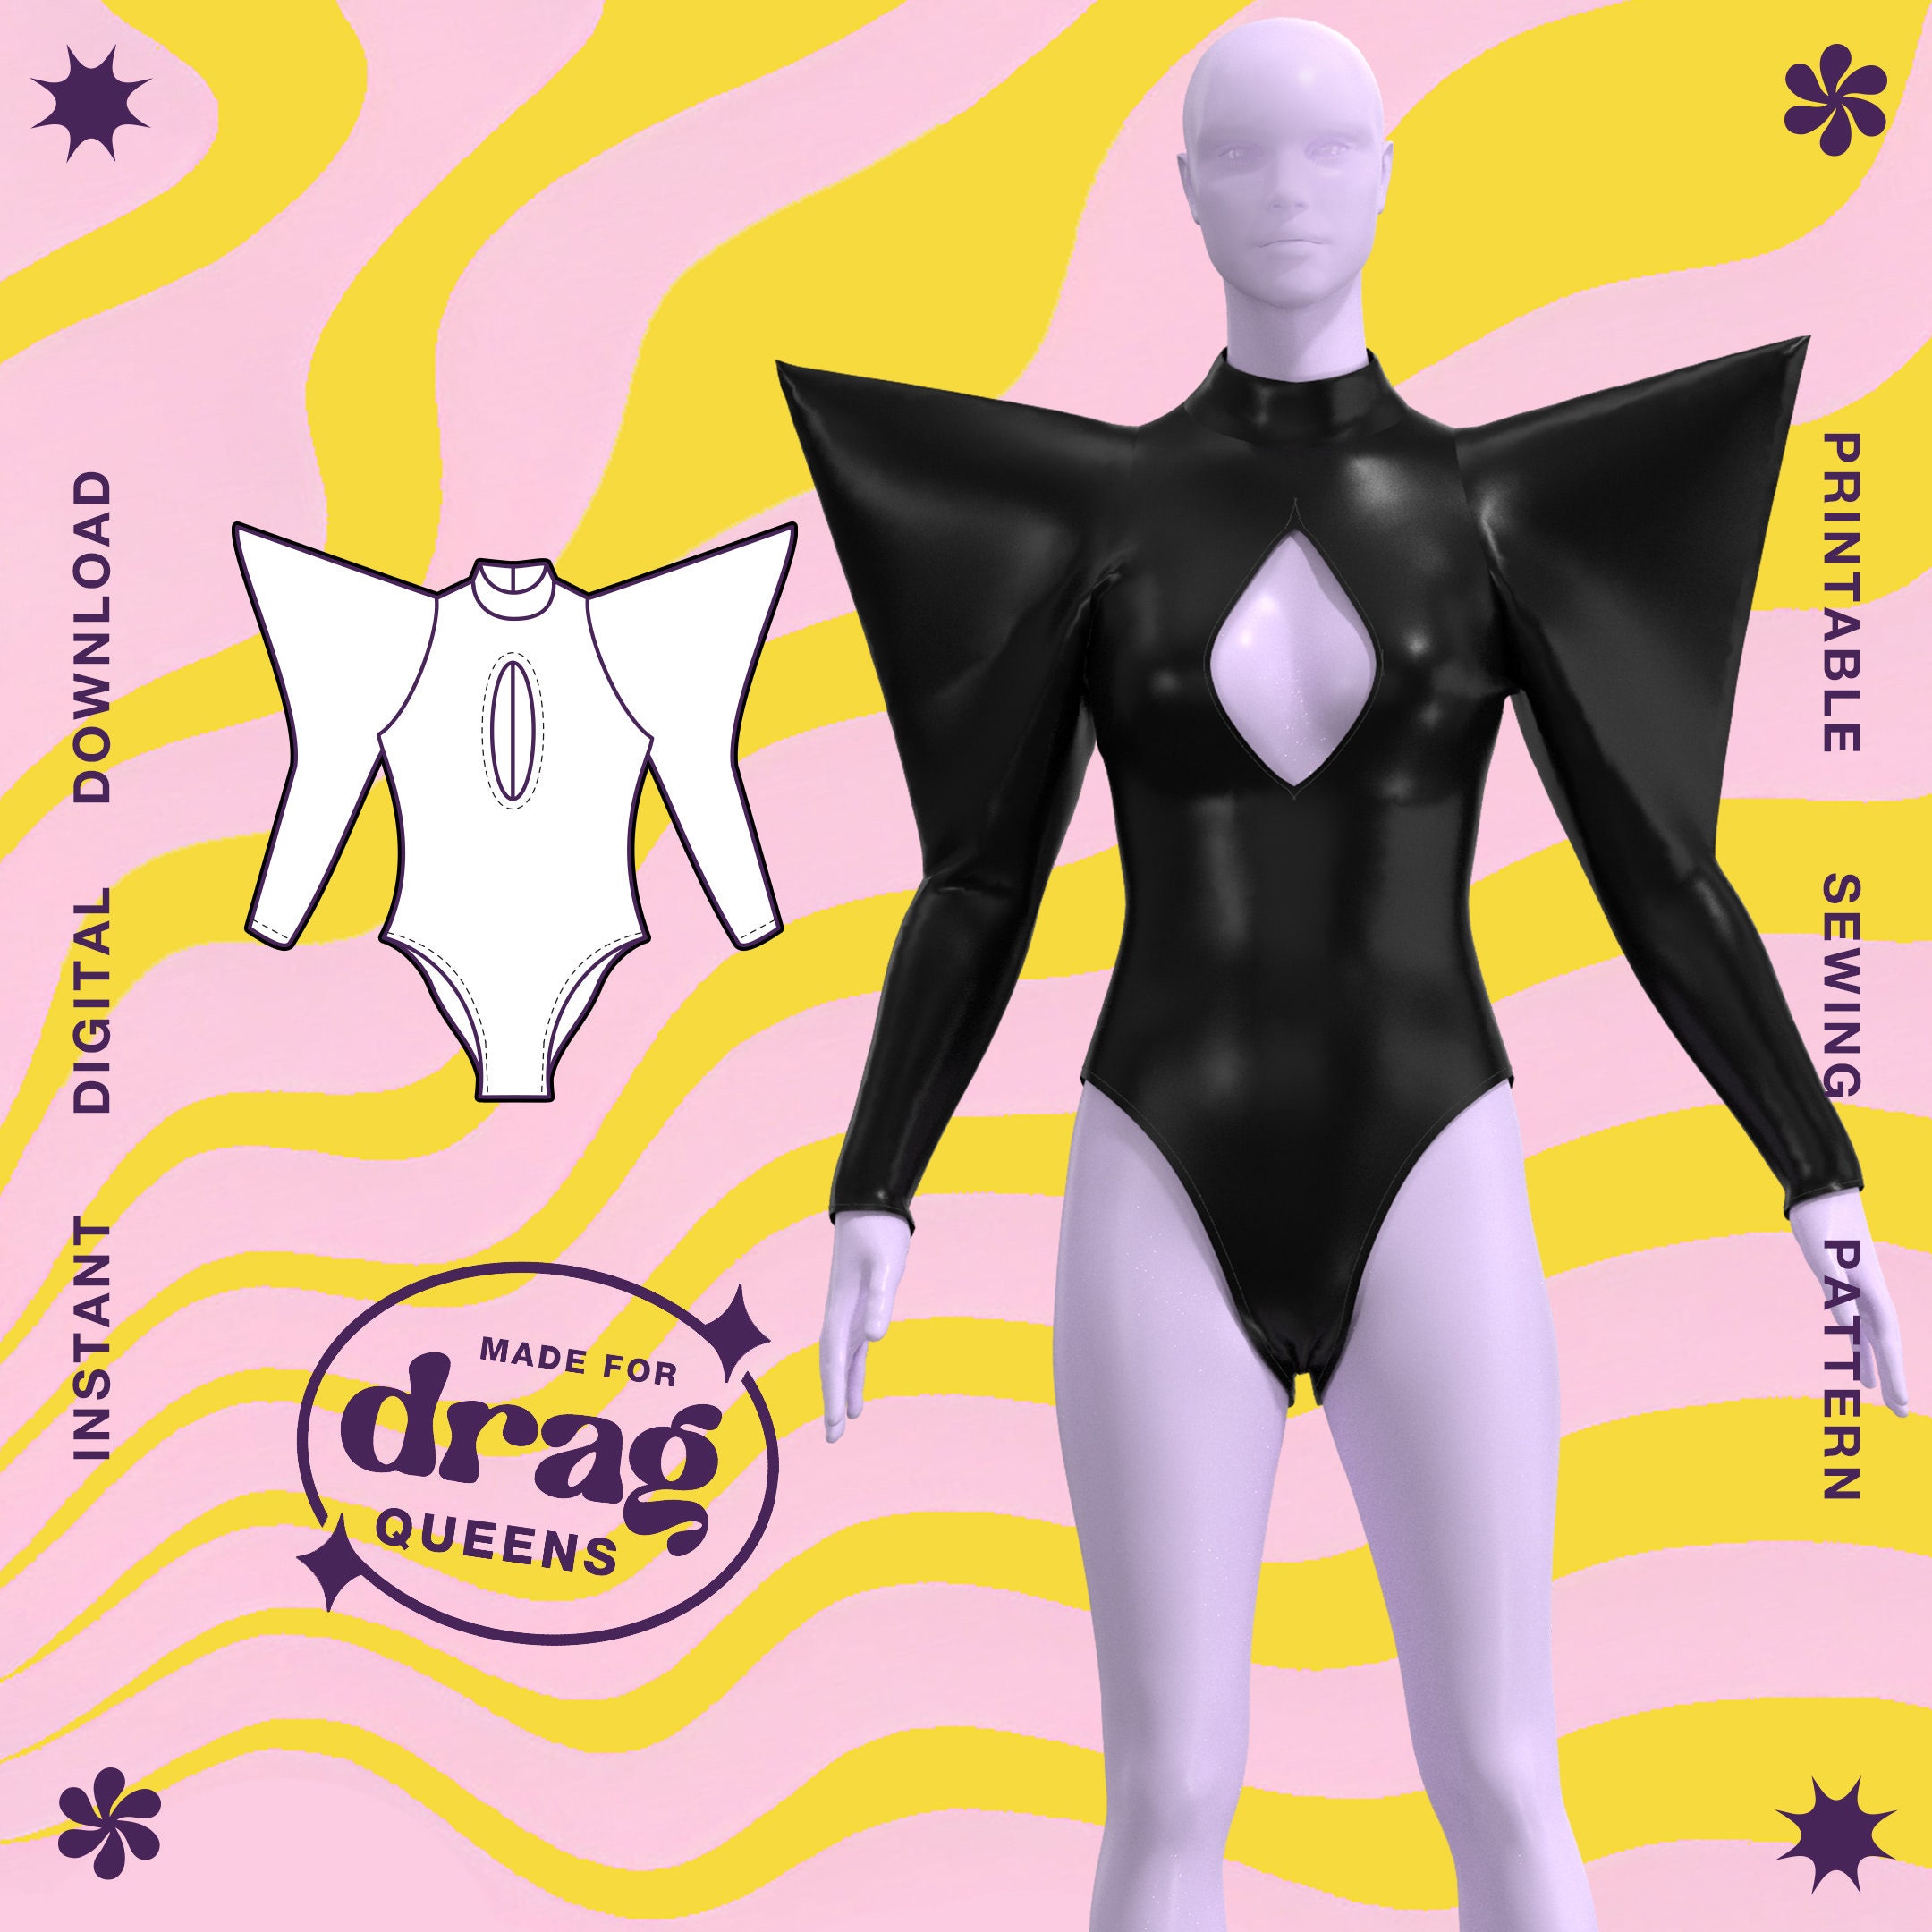 Waist Cover Undergarment Sewing Pattern XS-4X PDF Drag Queen